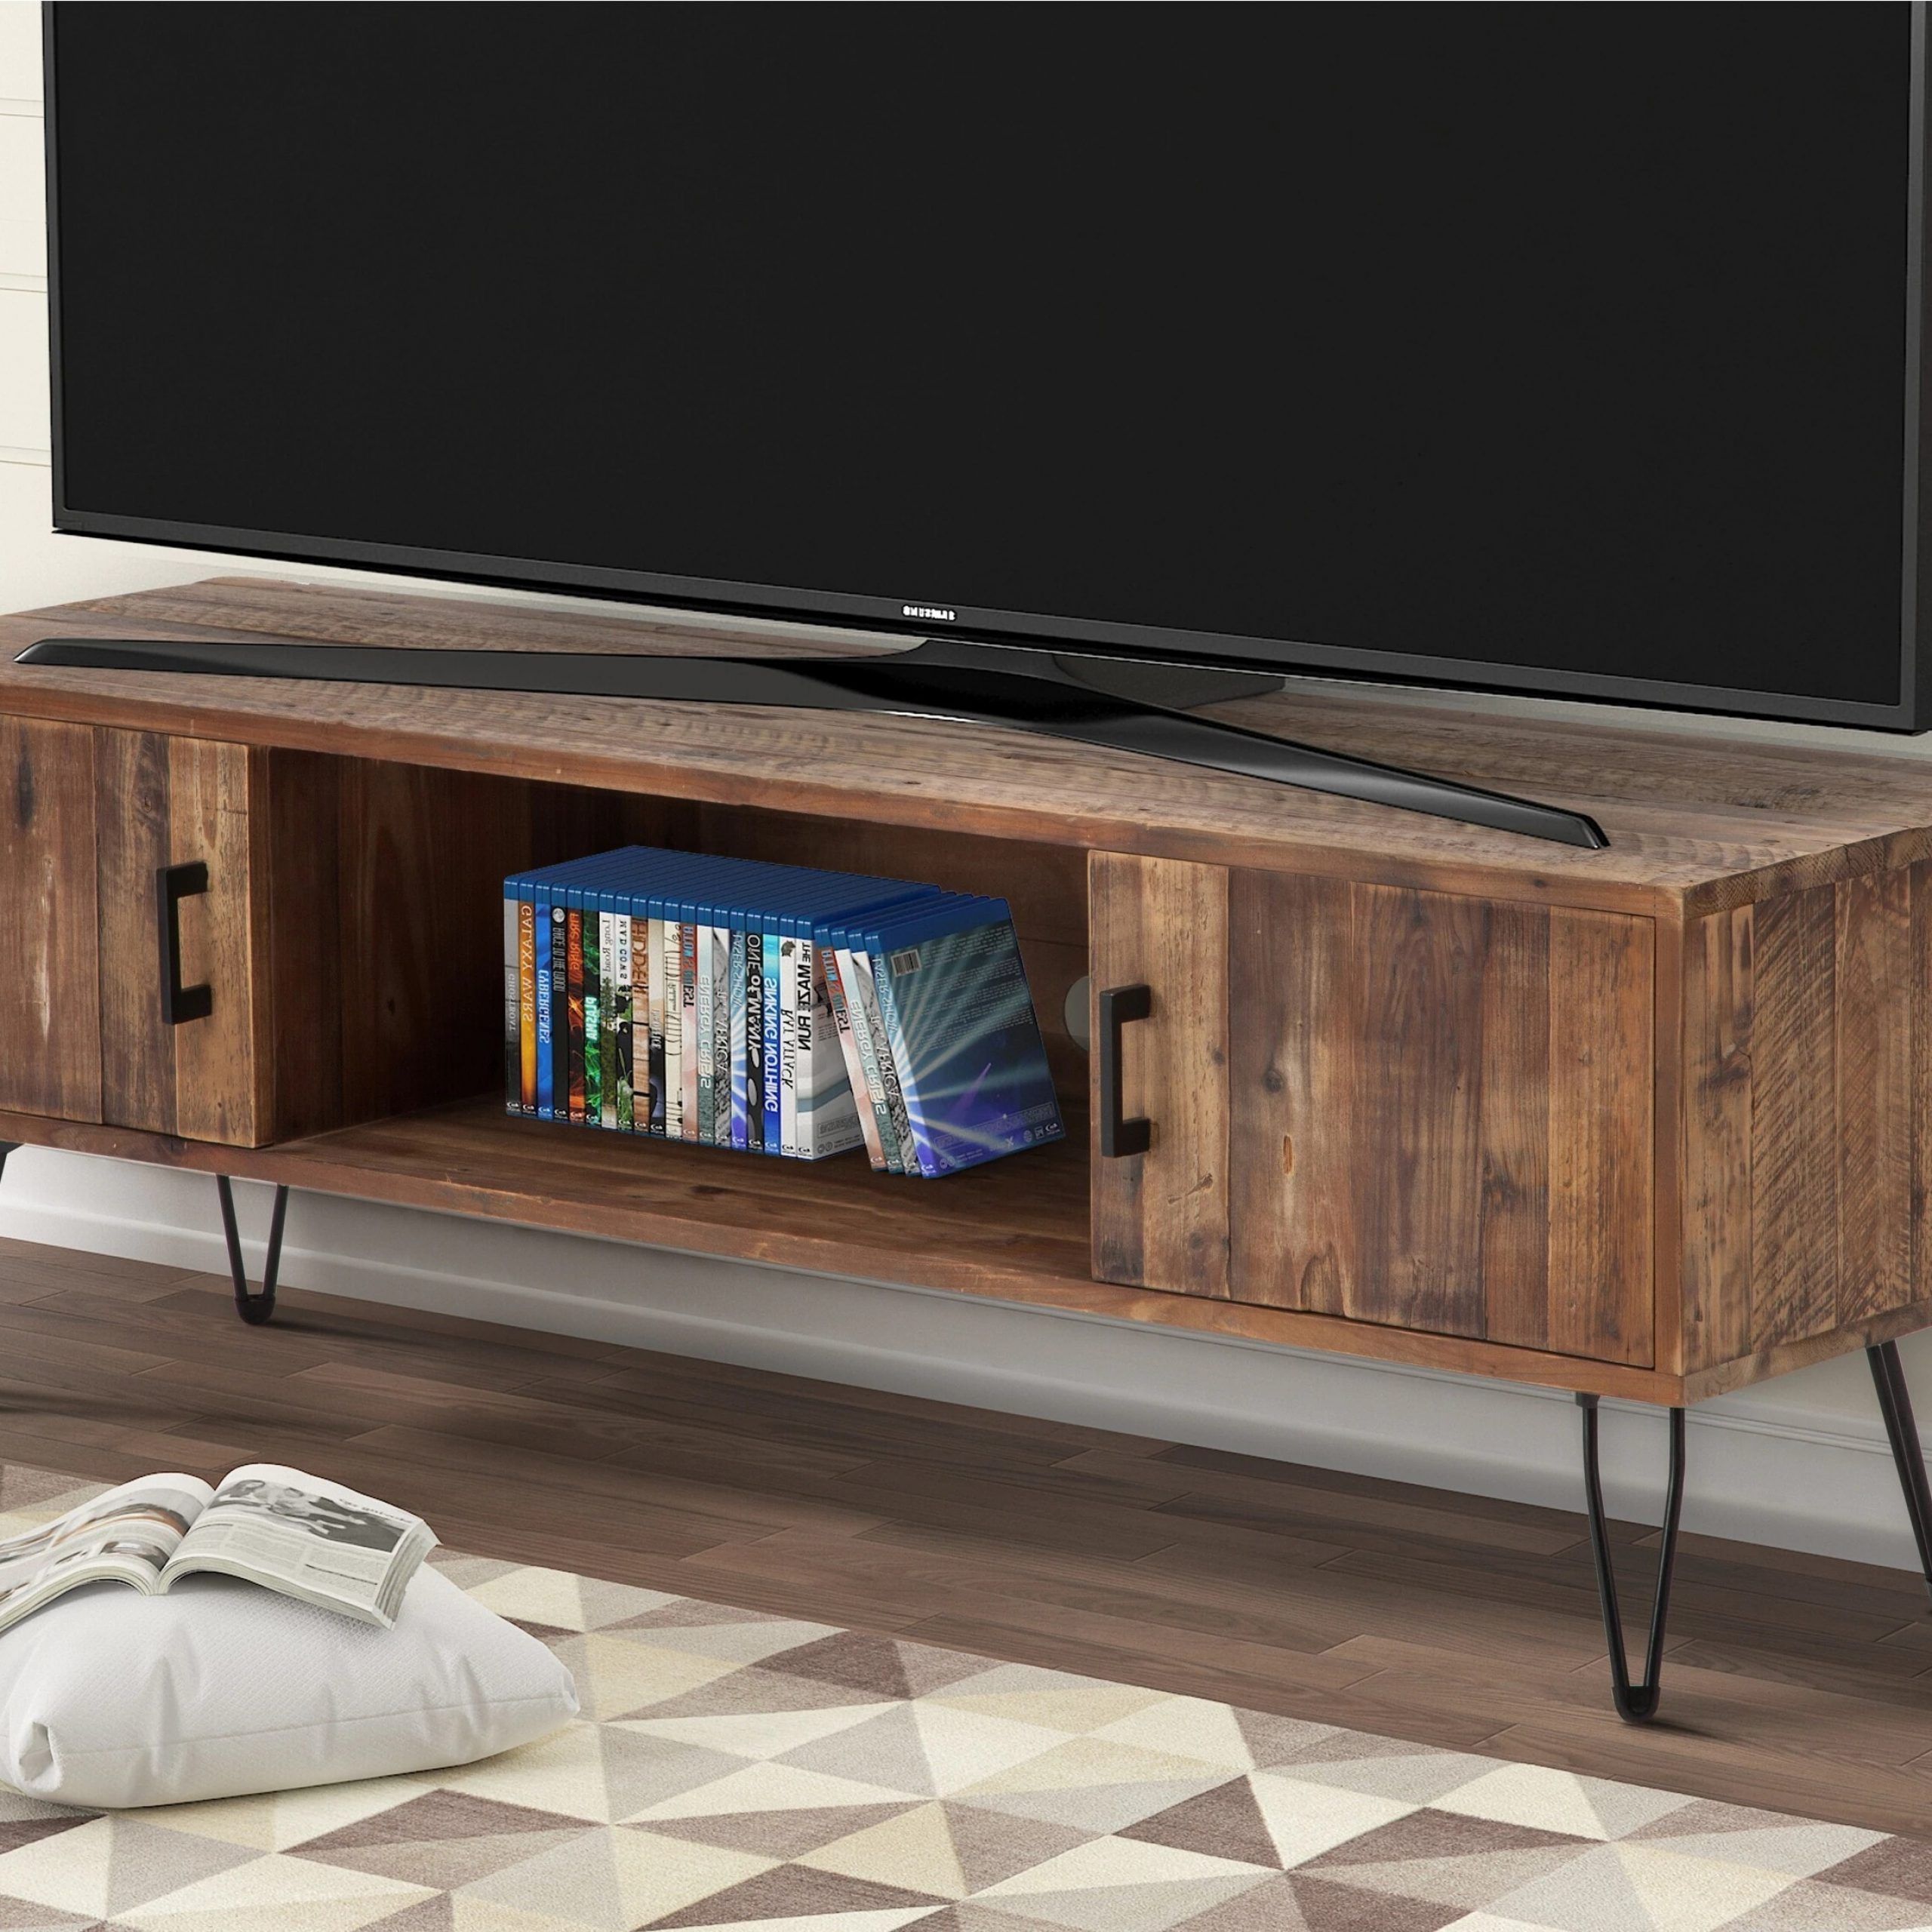 Metal And Wood Tv Stands – Ideas On Foter Pertaining To 2017 Iron Legs Tv Stands (View 10 of 10)